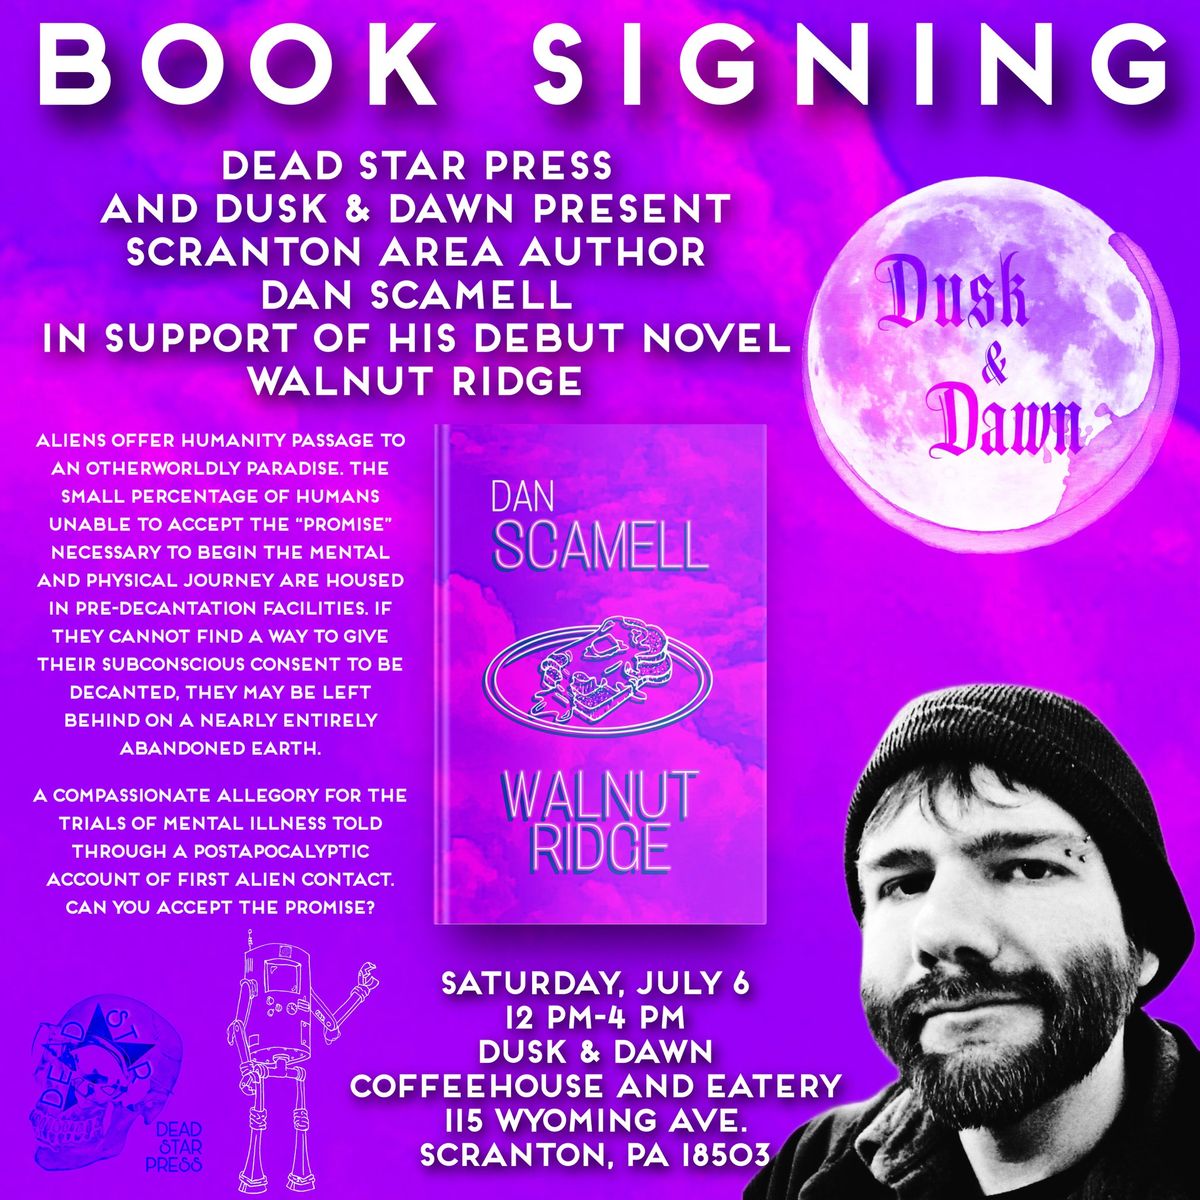 Dan Scamel debut book release and signing